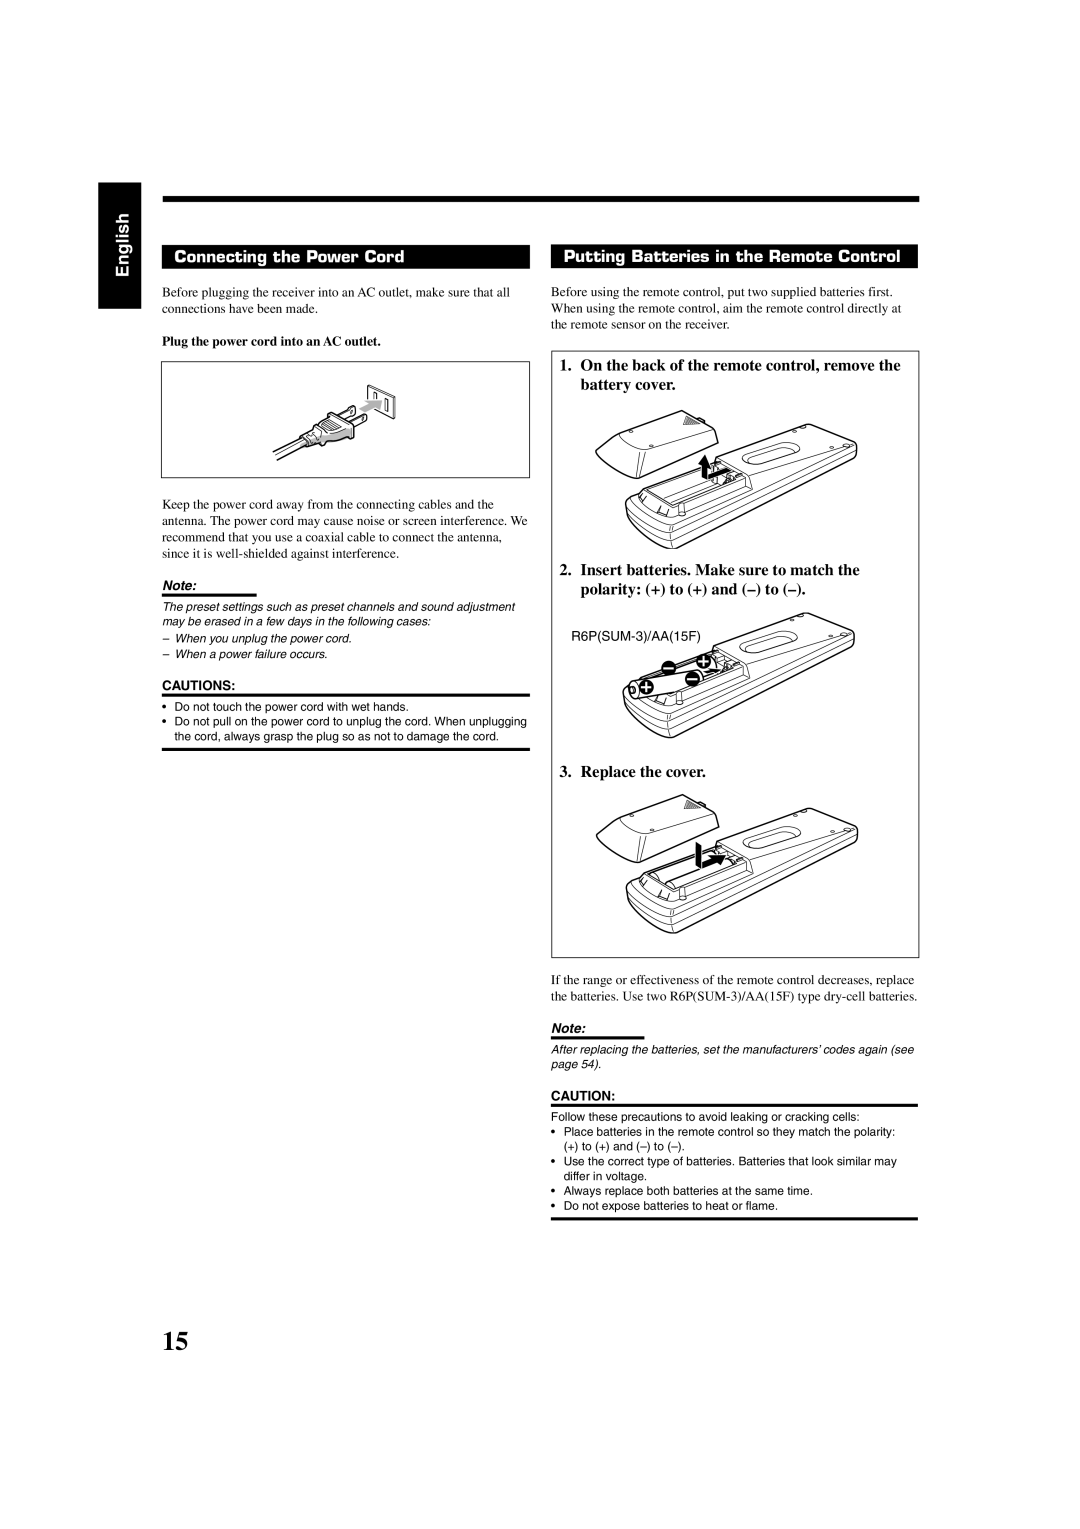 JVC RX-8020VBK manual English, Connecting the Power Cord, Putting Batteries in the Remote Control, Cautions 